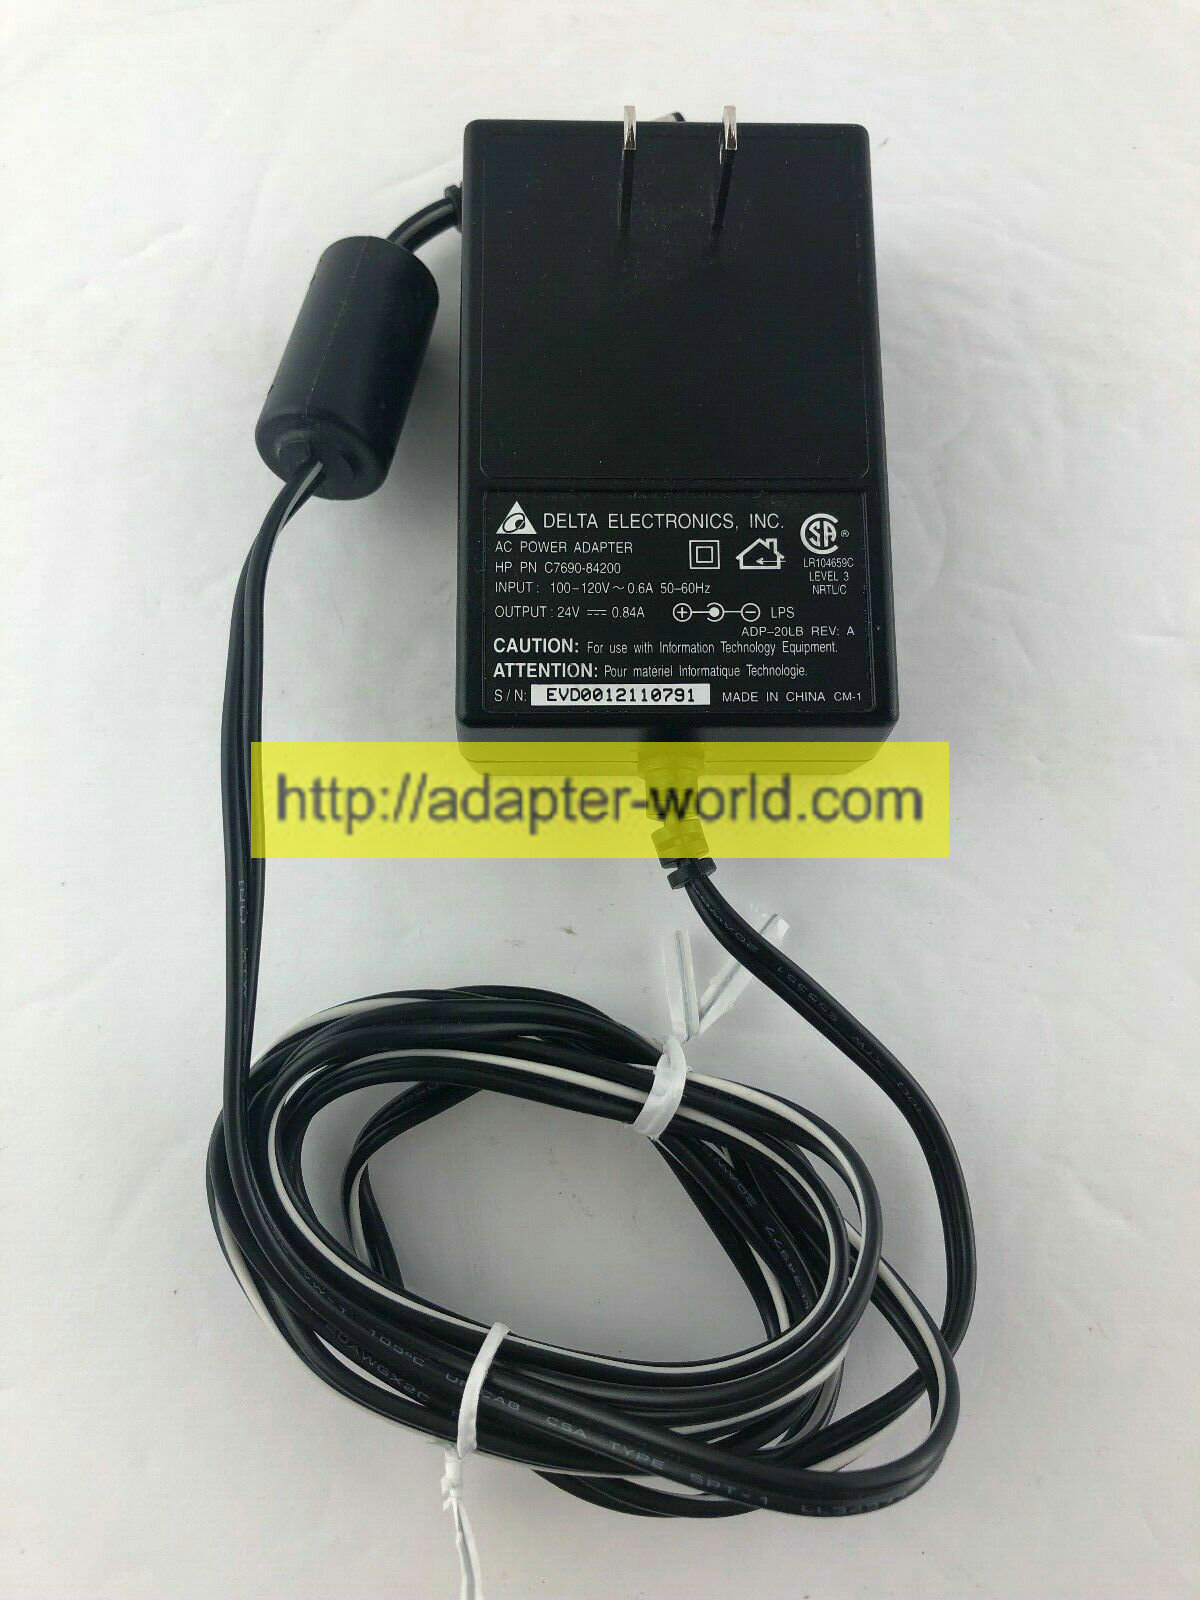 *100% Brand NEW* DC 24V 0.84A AC Adapter for Delta Electronics ADP-20LB Power Supply Free shipping! - Click Image to Close